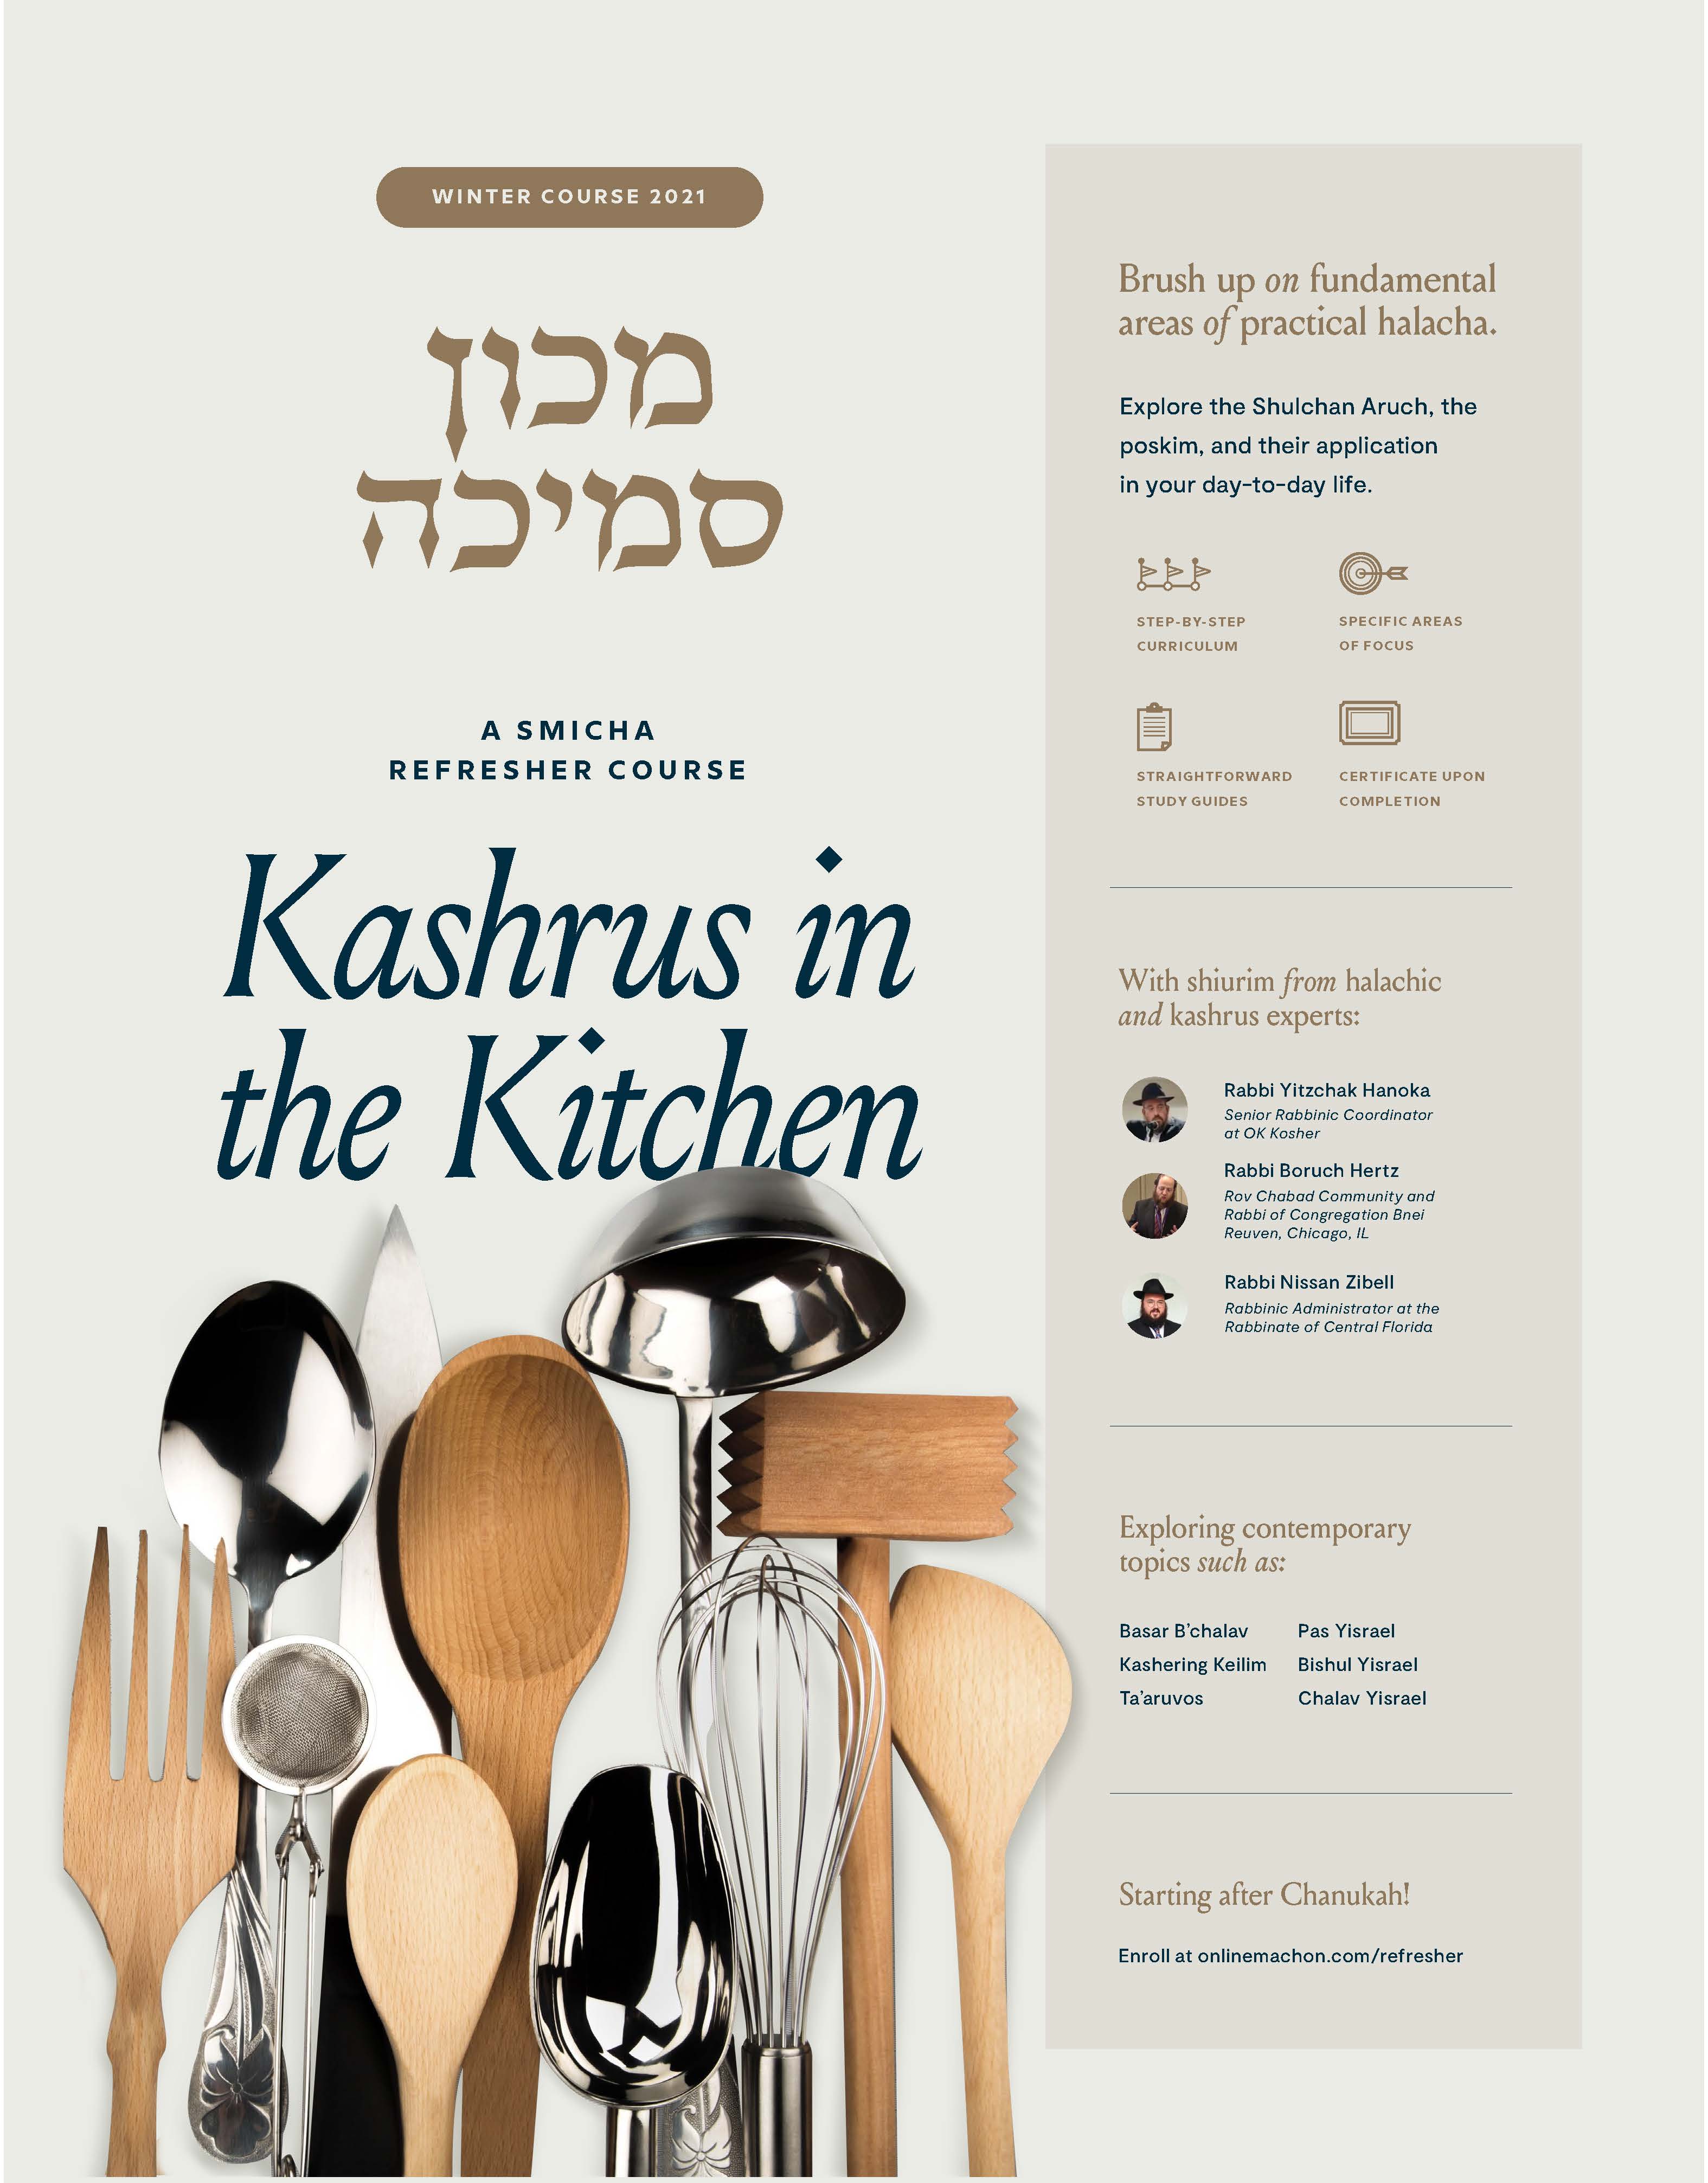 New Course: Kashrus in the Kitchen